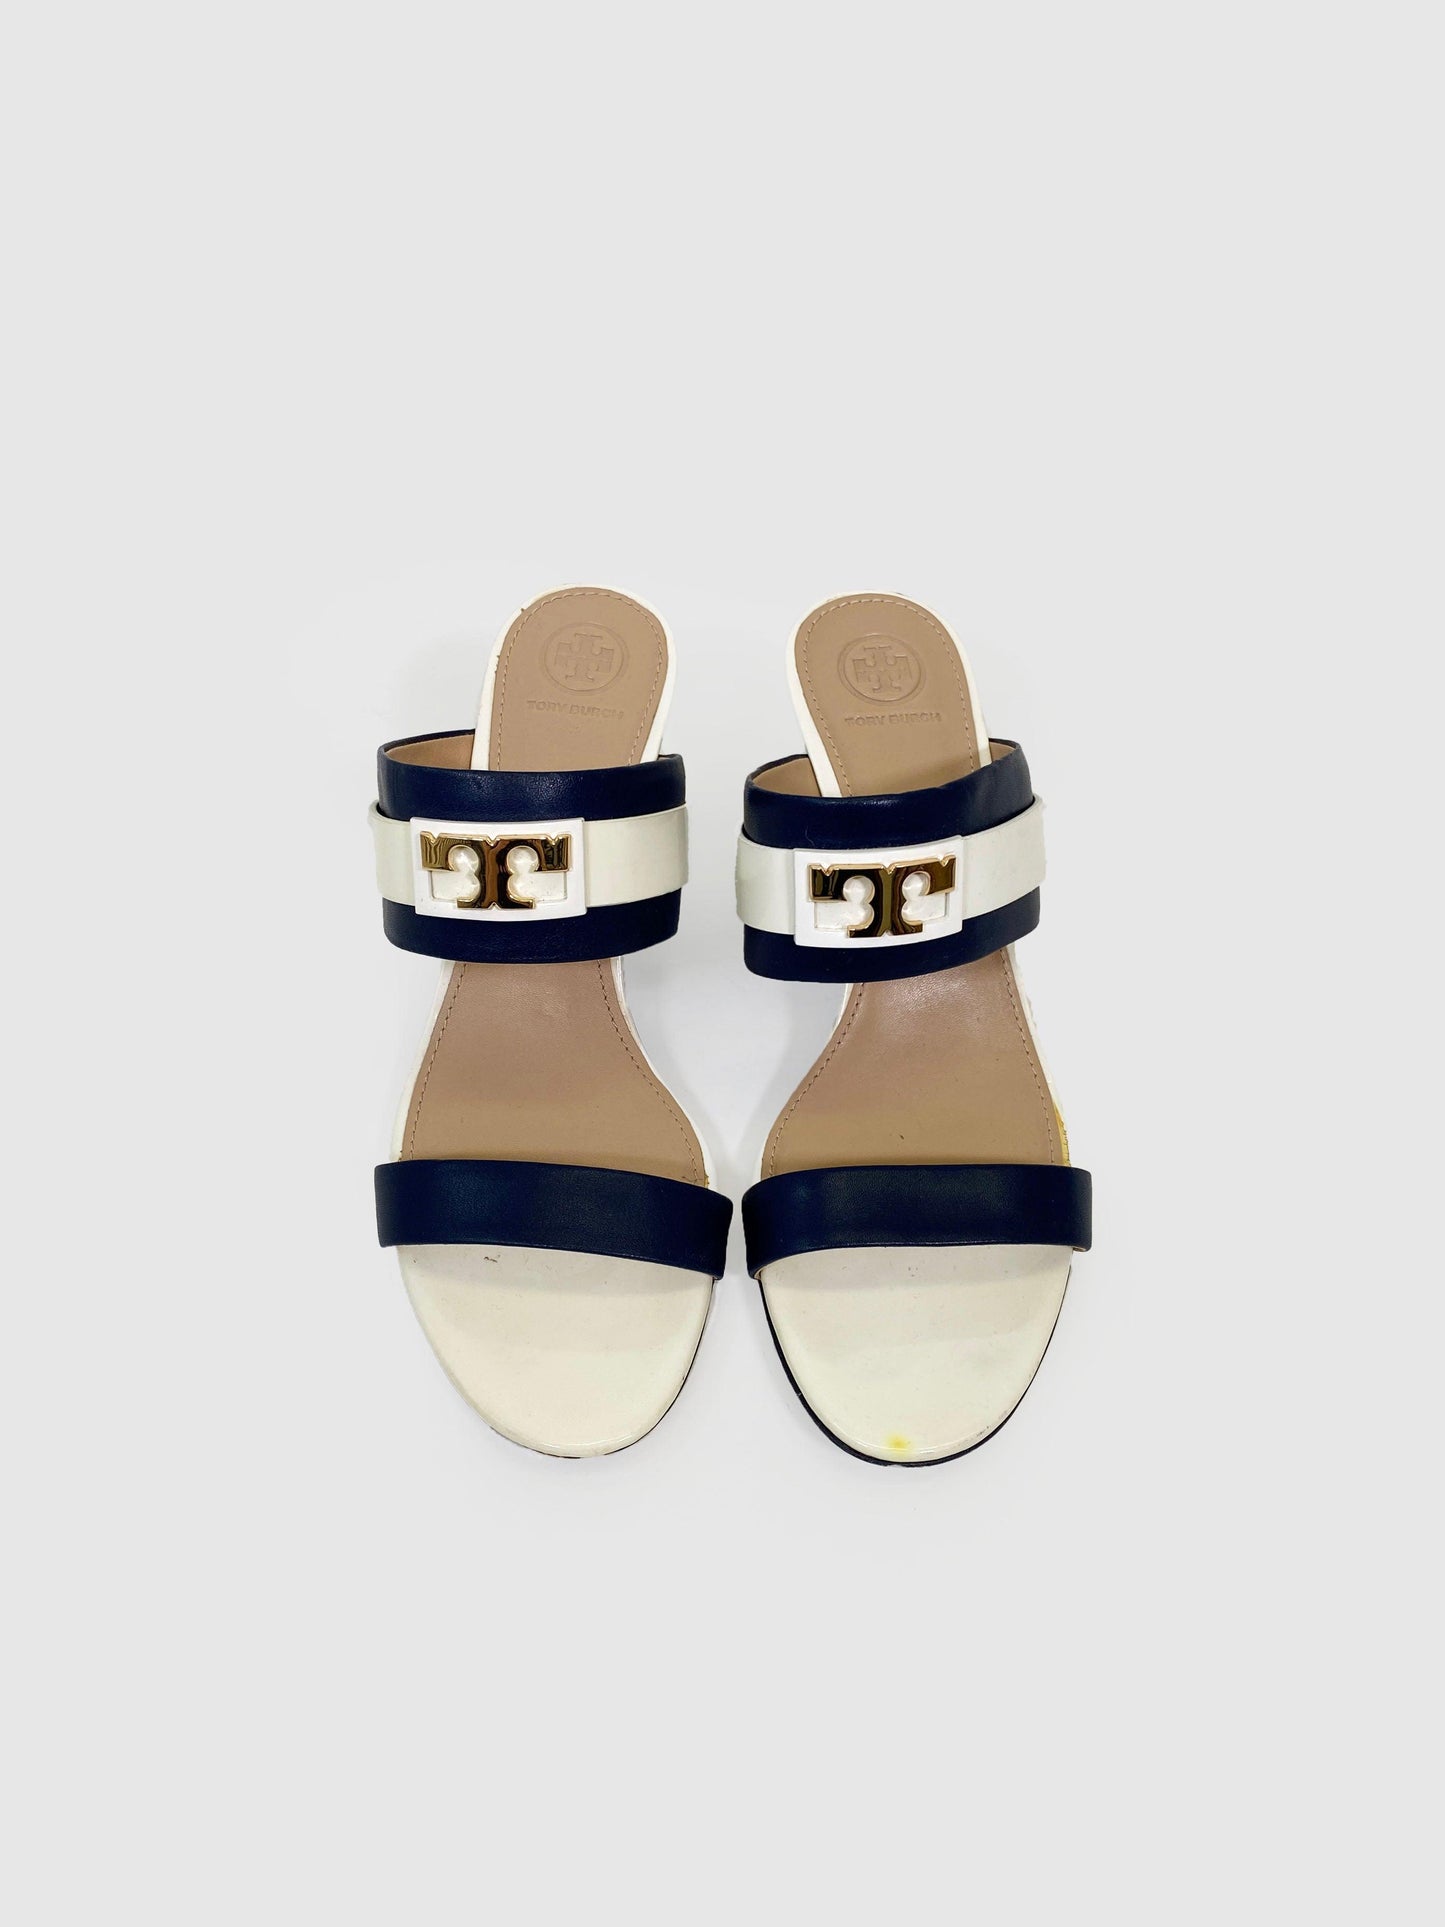 Tory Burch - Size 9 - Second Nature Boutique